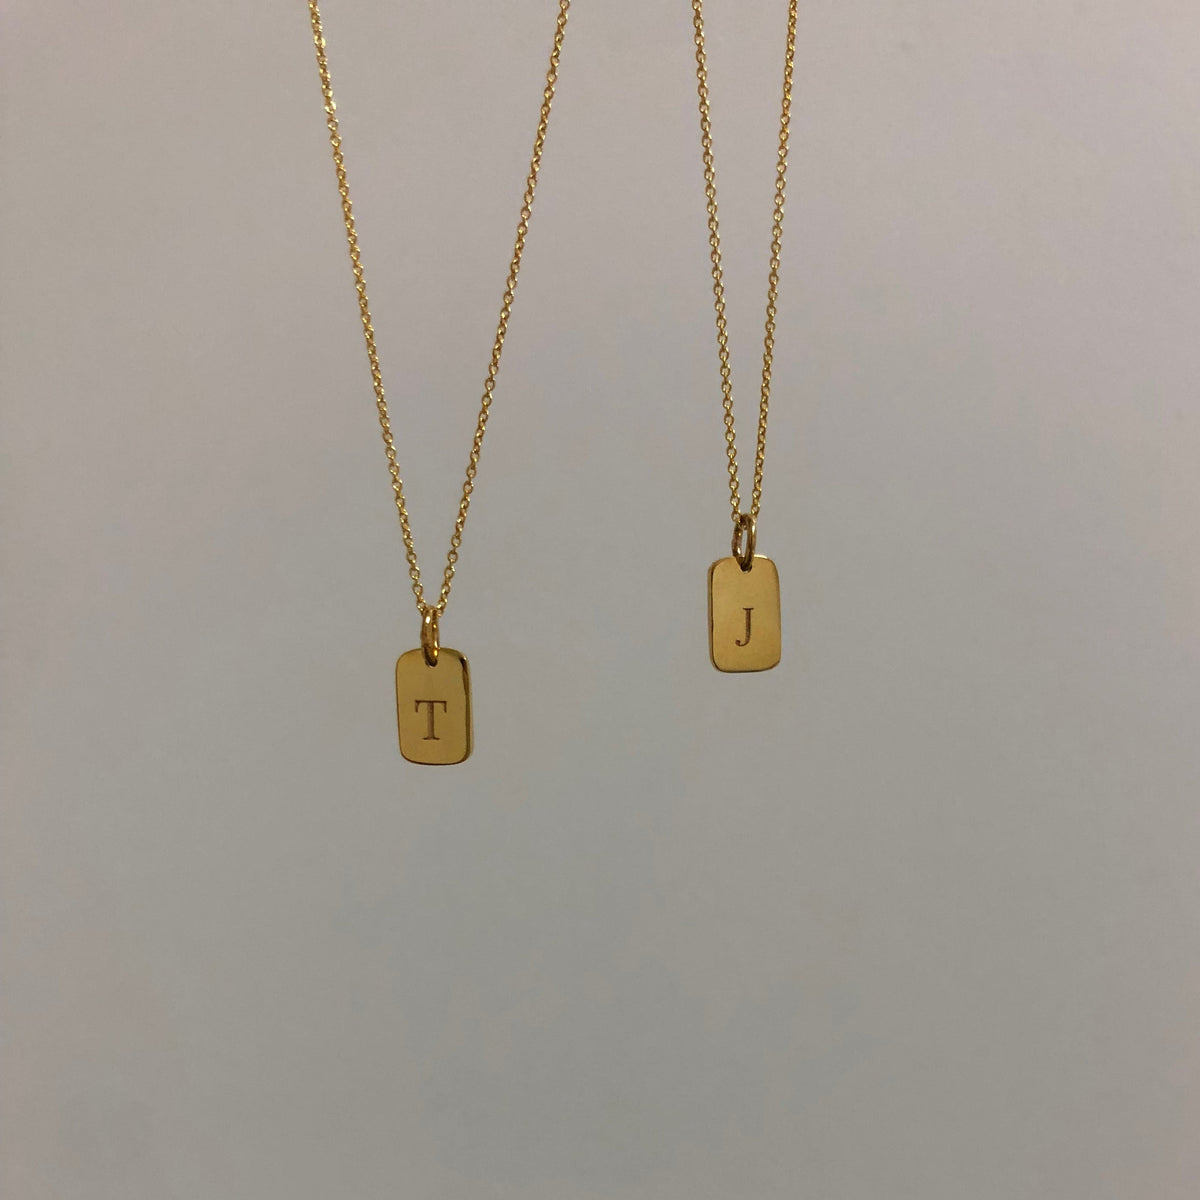 14k Yellow Gold Mini Dog Tag Necklace